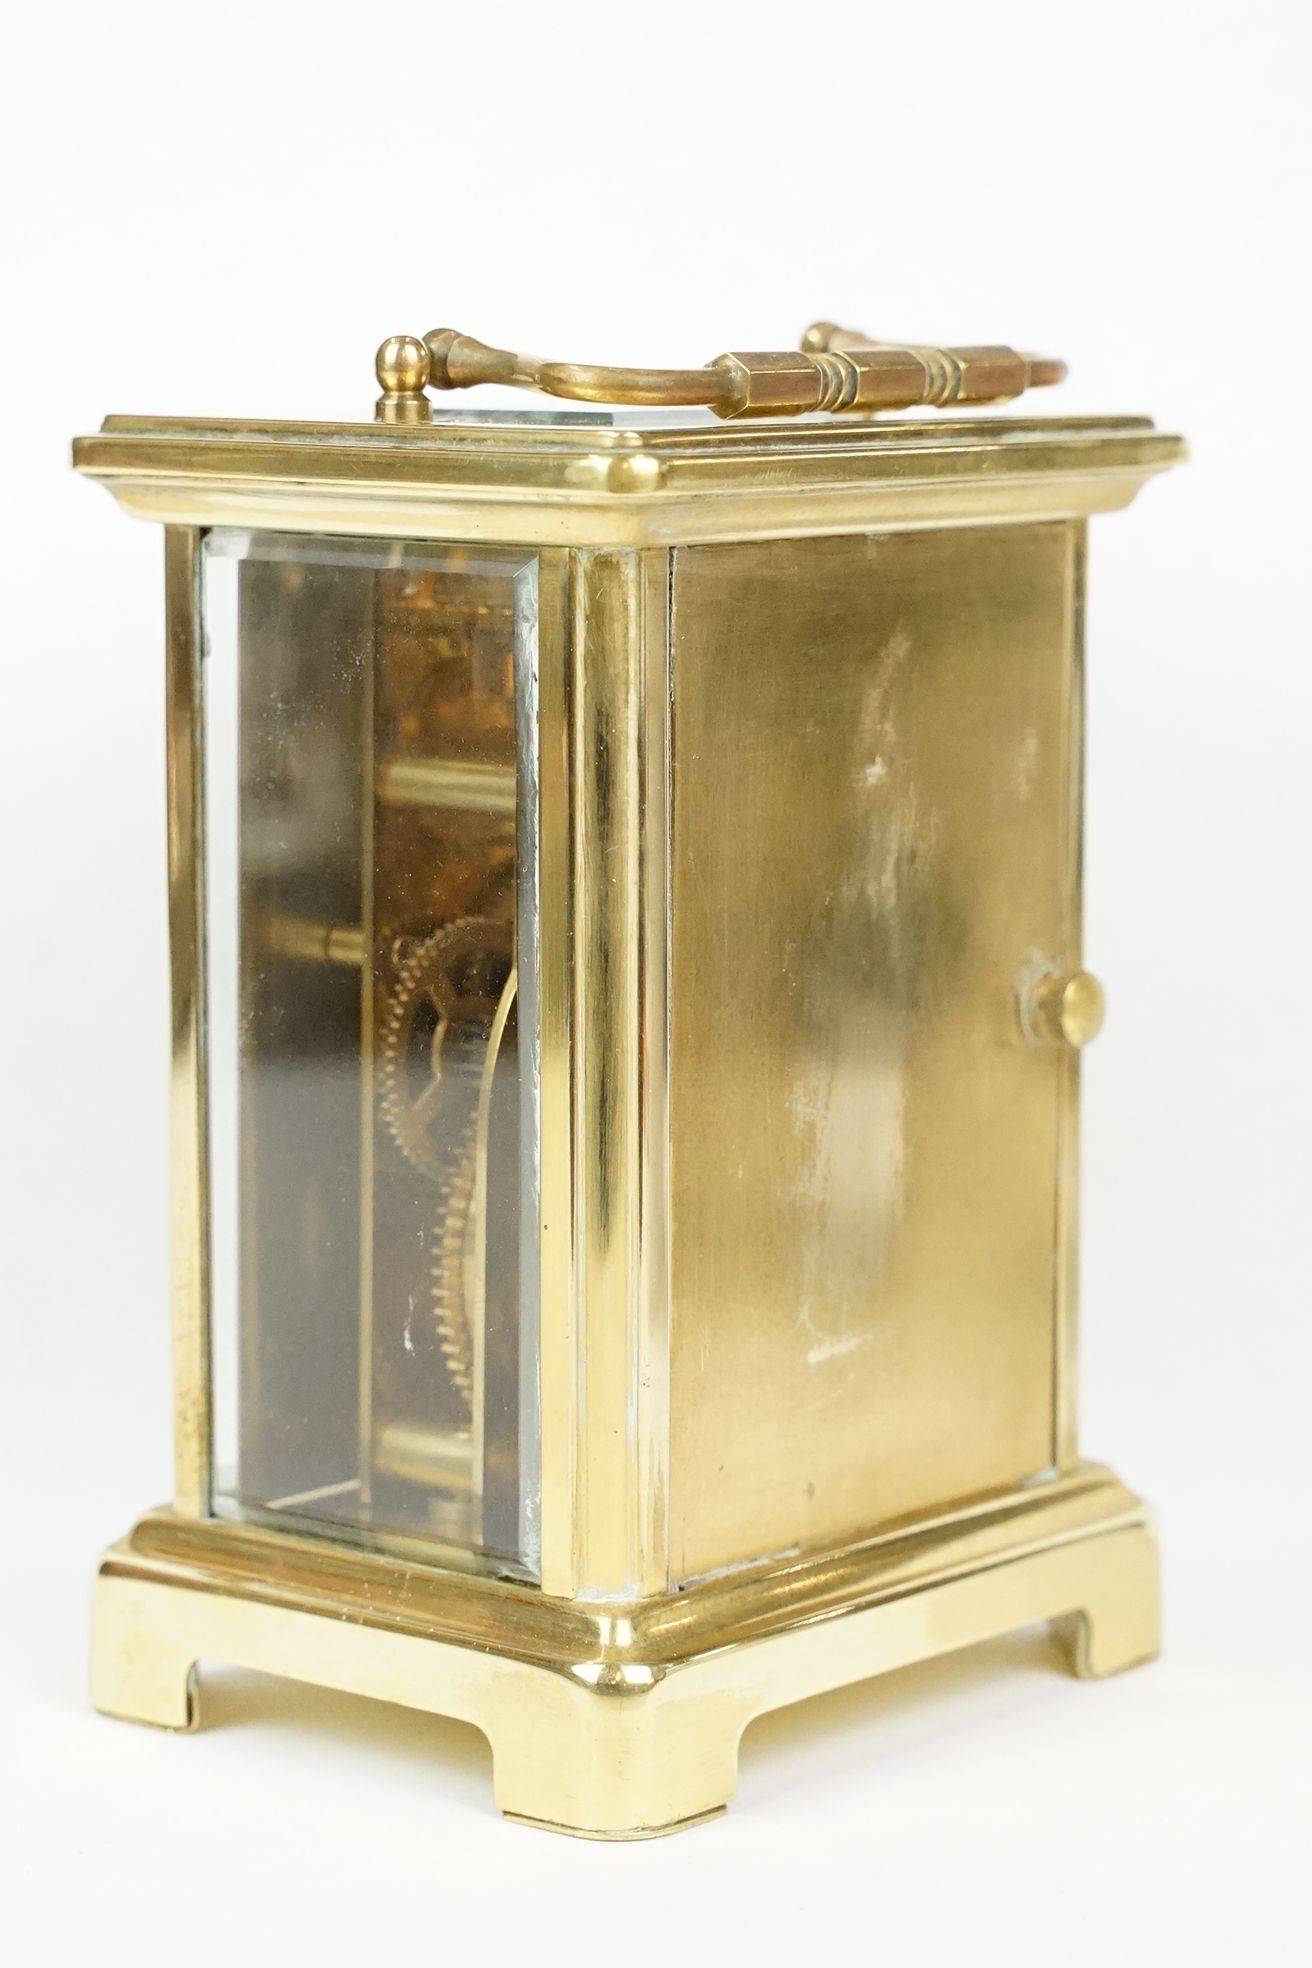 French ' Bayard ' 8 Day Carriage Clock in gilt metal case with three bevelled glass panels, 15cm - Image 5 of 9